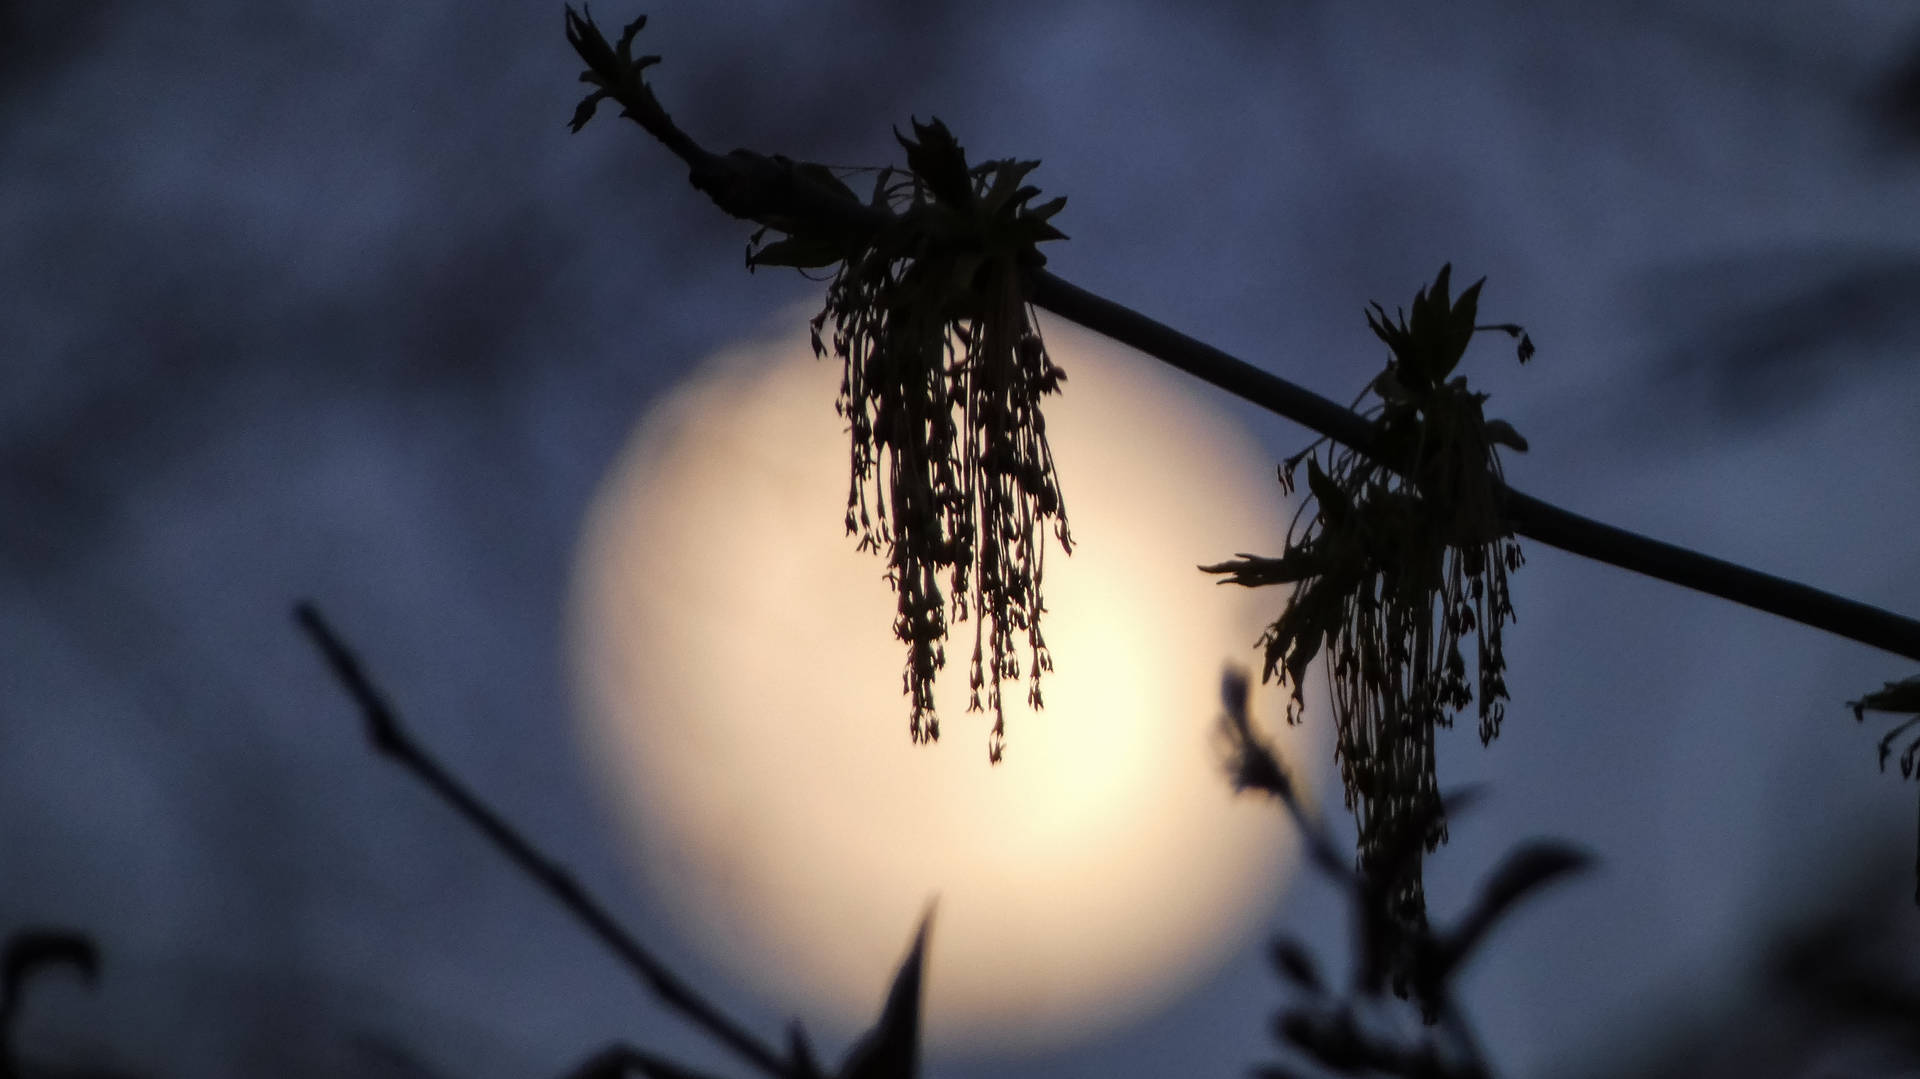 Hd Moon Behind Plant Silhouettes Background